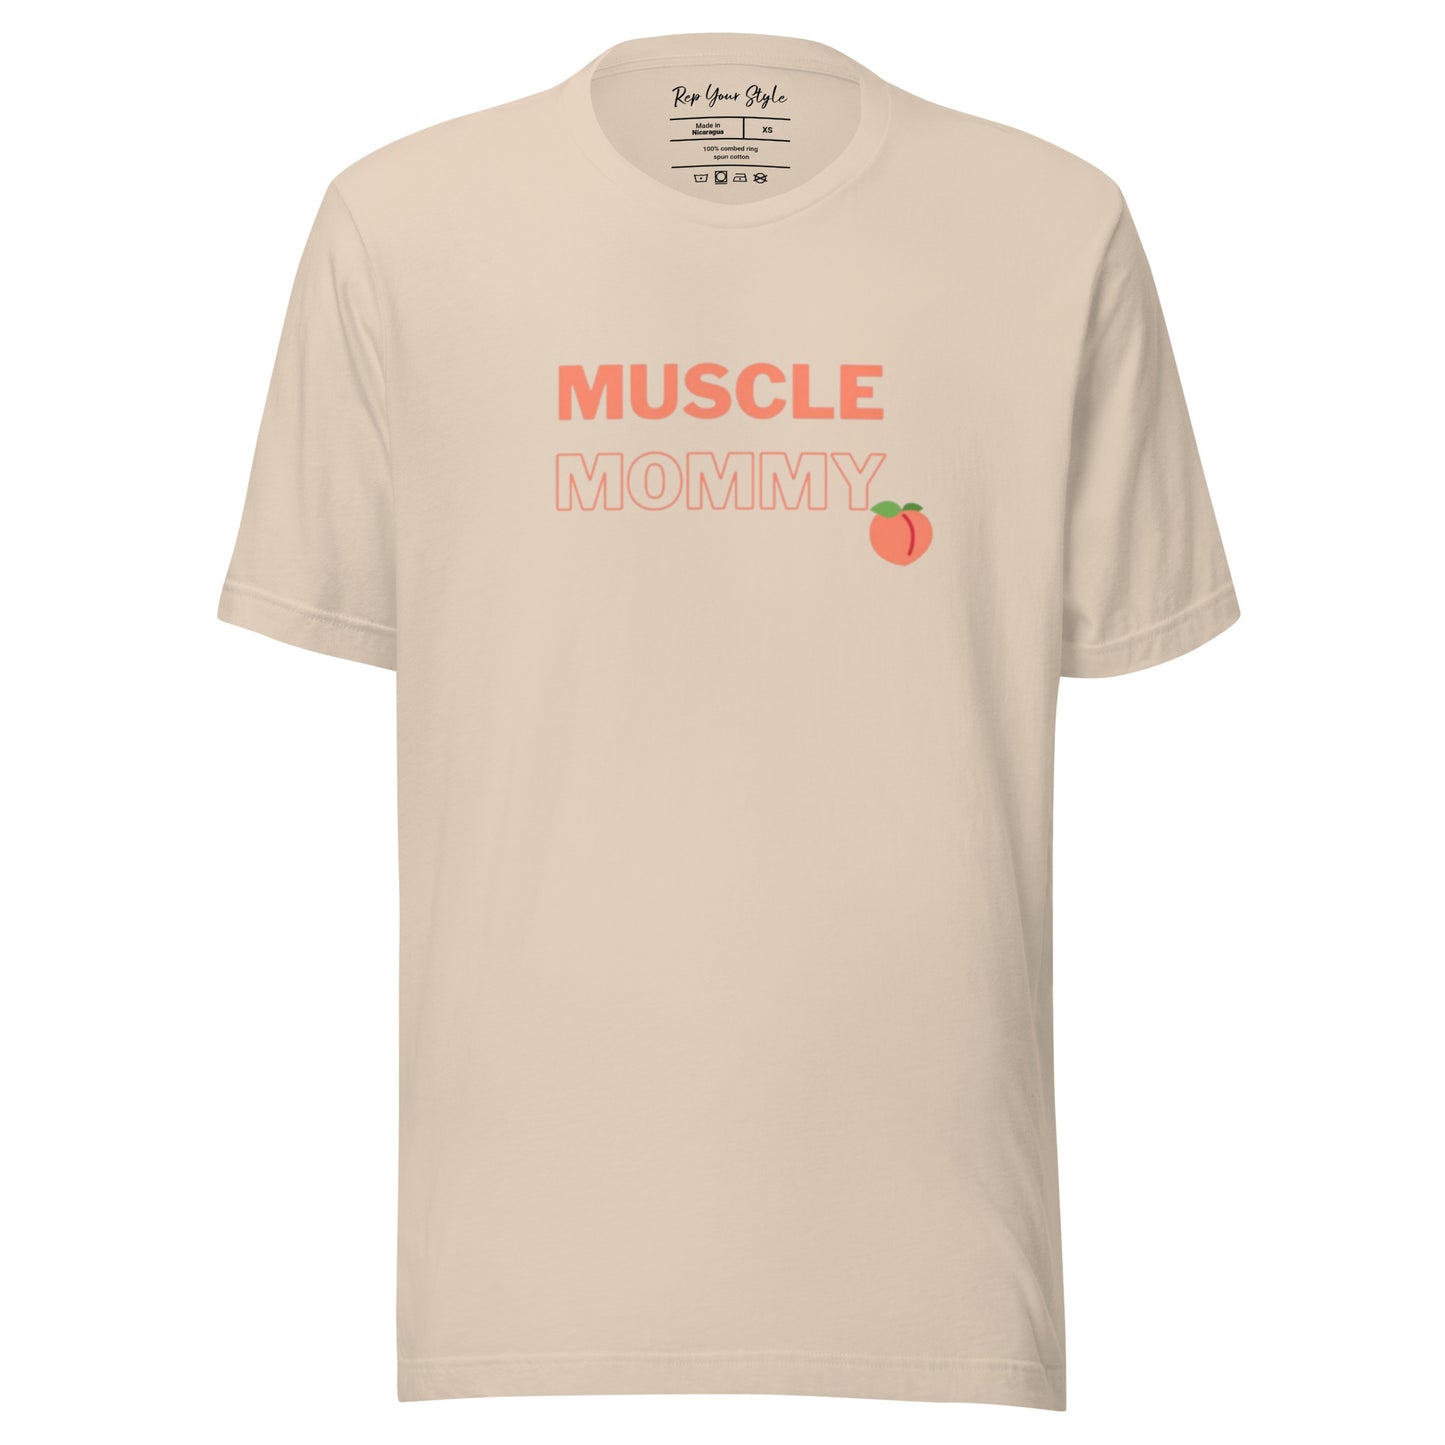 Muscle mommy 2 t-shirt